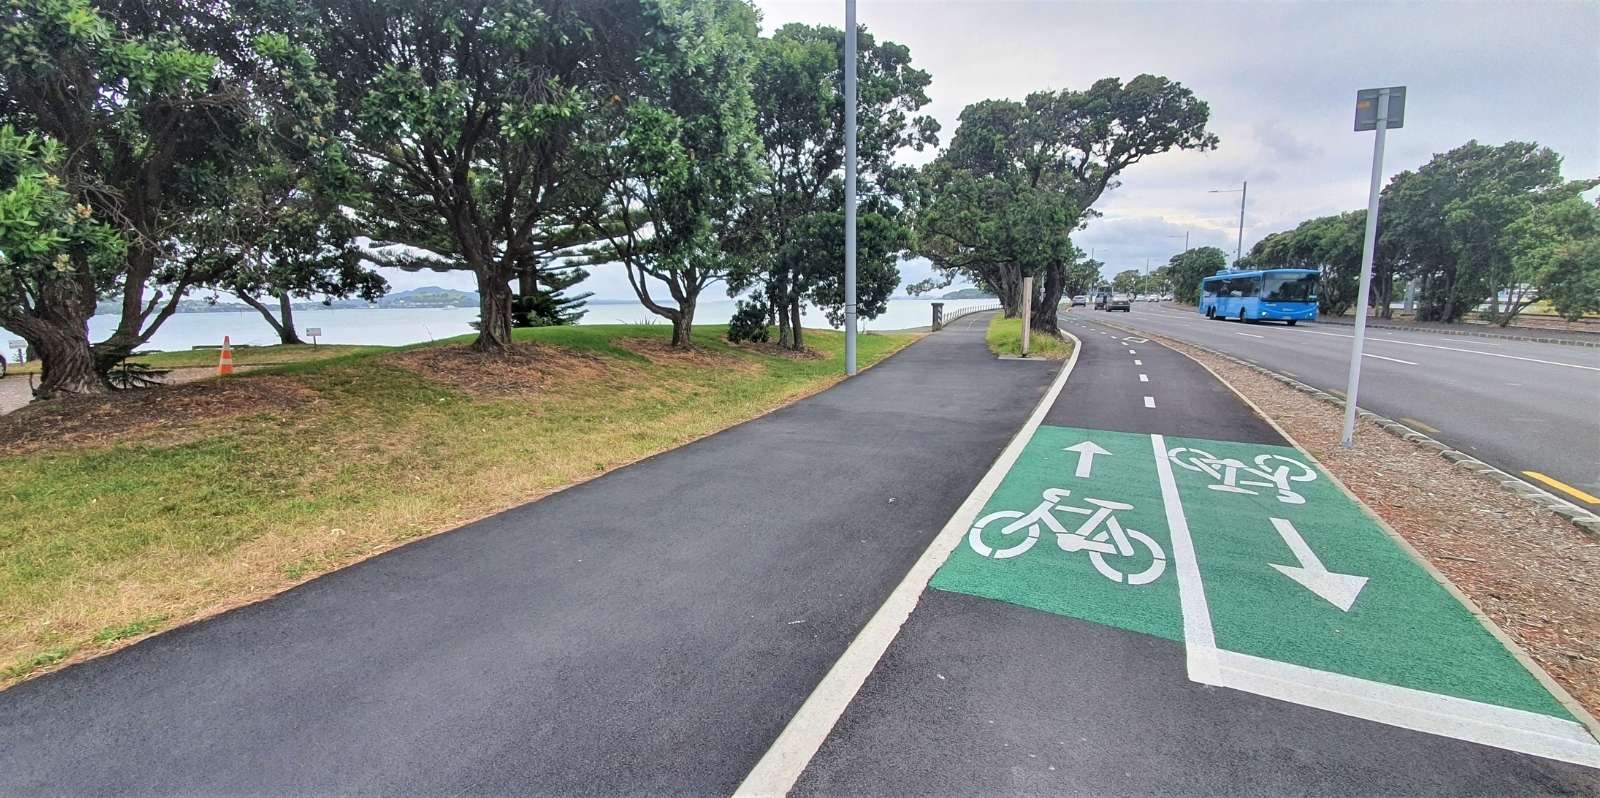 New two way bike lane on the Auckland waterfront in 2021 (1)